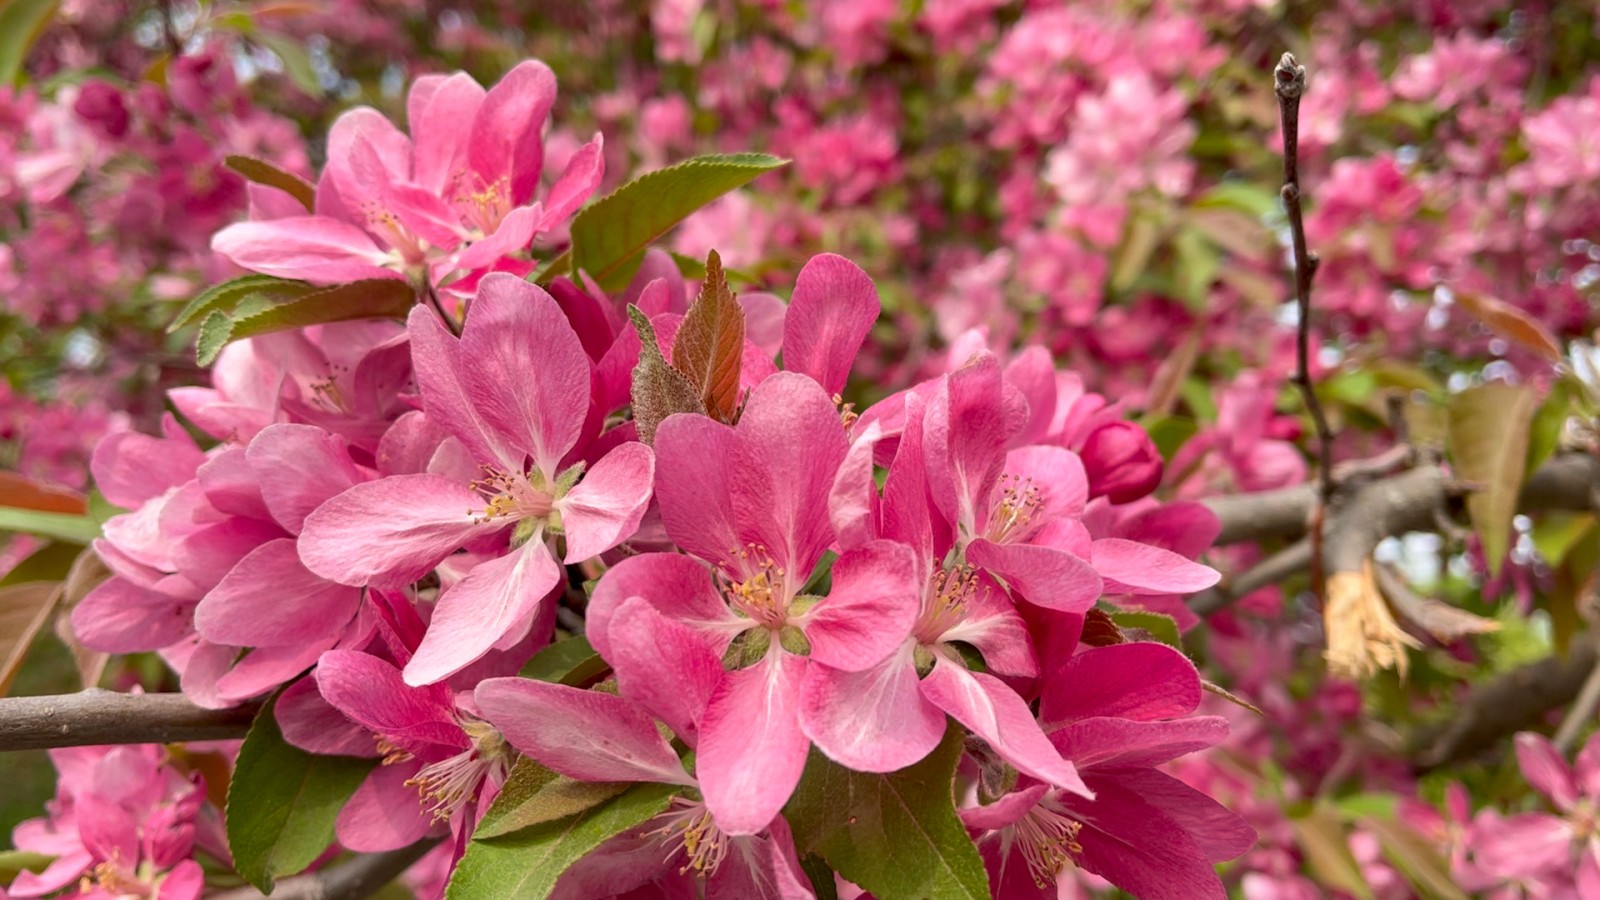 A view of very pink spring flowers.